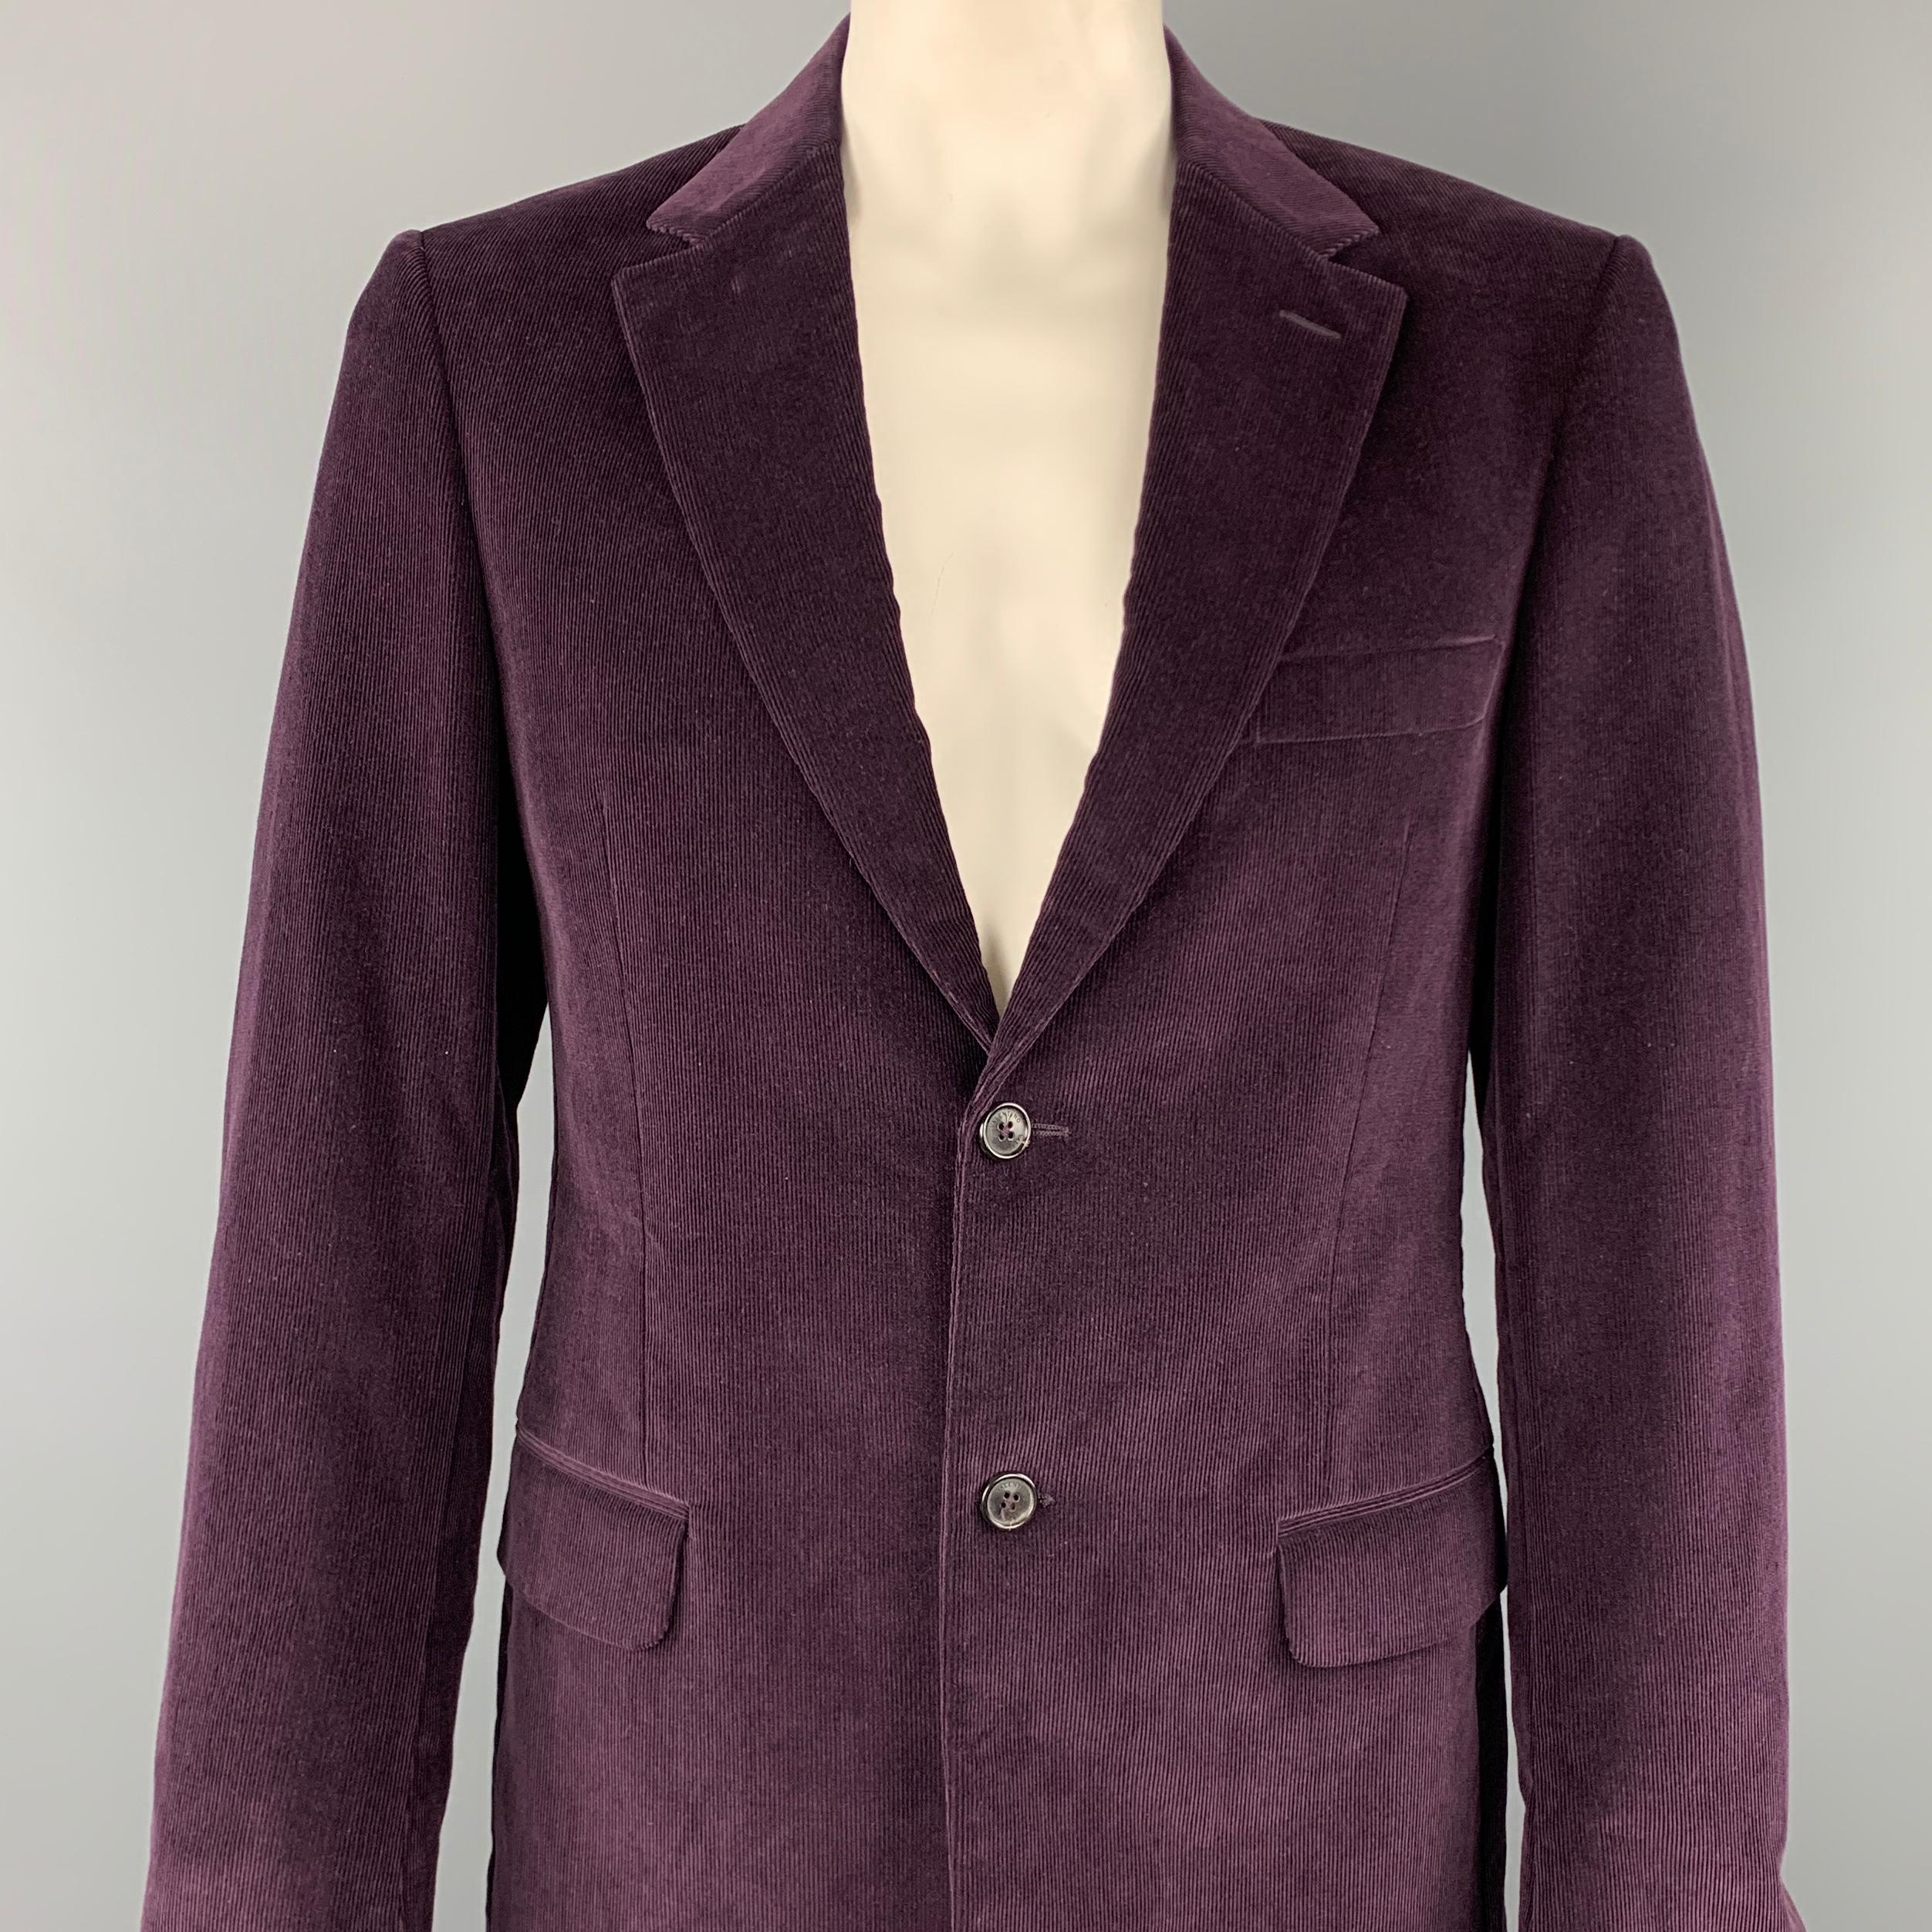 VALENTINO sport coat comes in a purple textured corduroy featuring a notch lapel, flap pockets, and a two button closure. Made in Italy.

Excellent Pre-Owned Condition.
Marked: 50

Measurements:

Shoulder: 19 in. 
Chest: 40 in. 
Sleeve: 26 in.